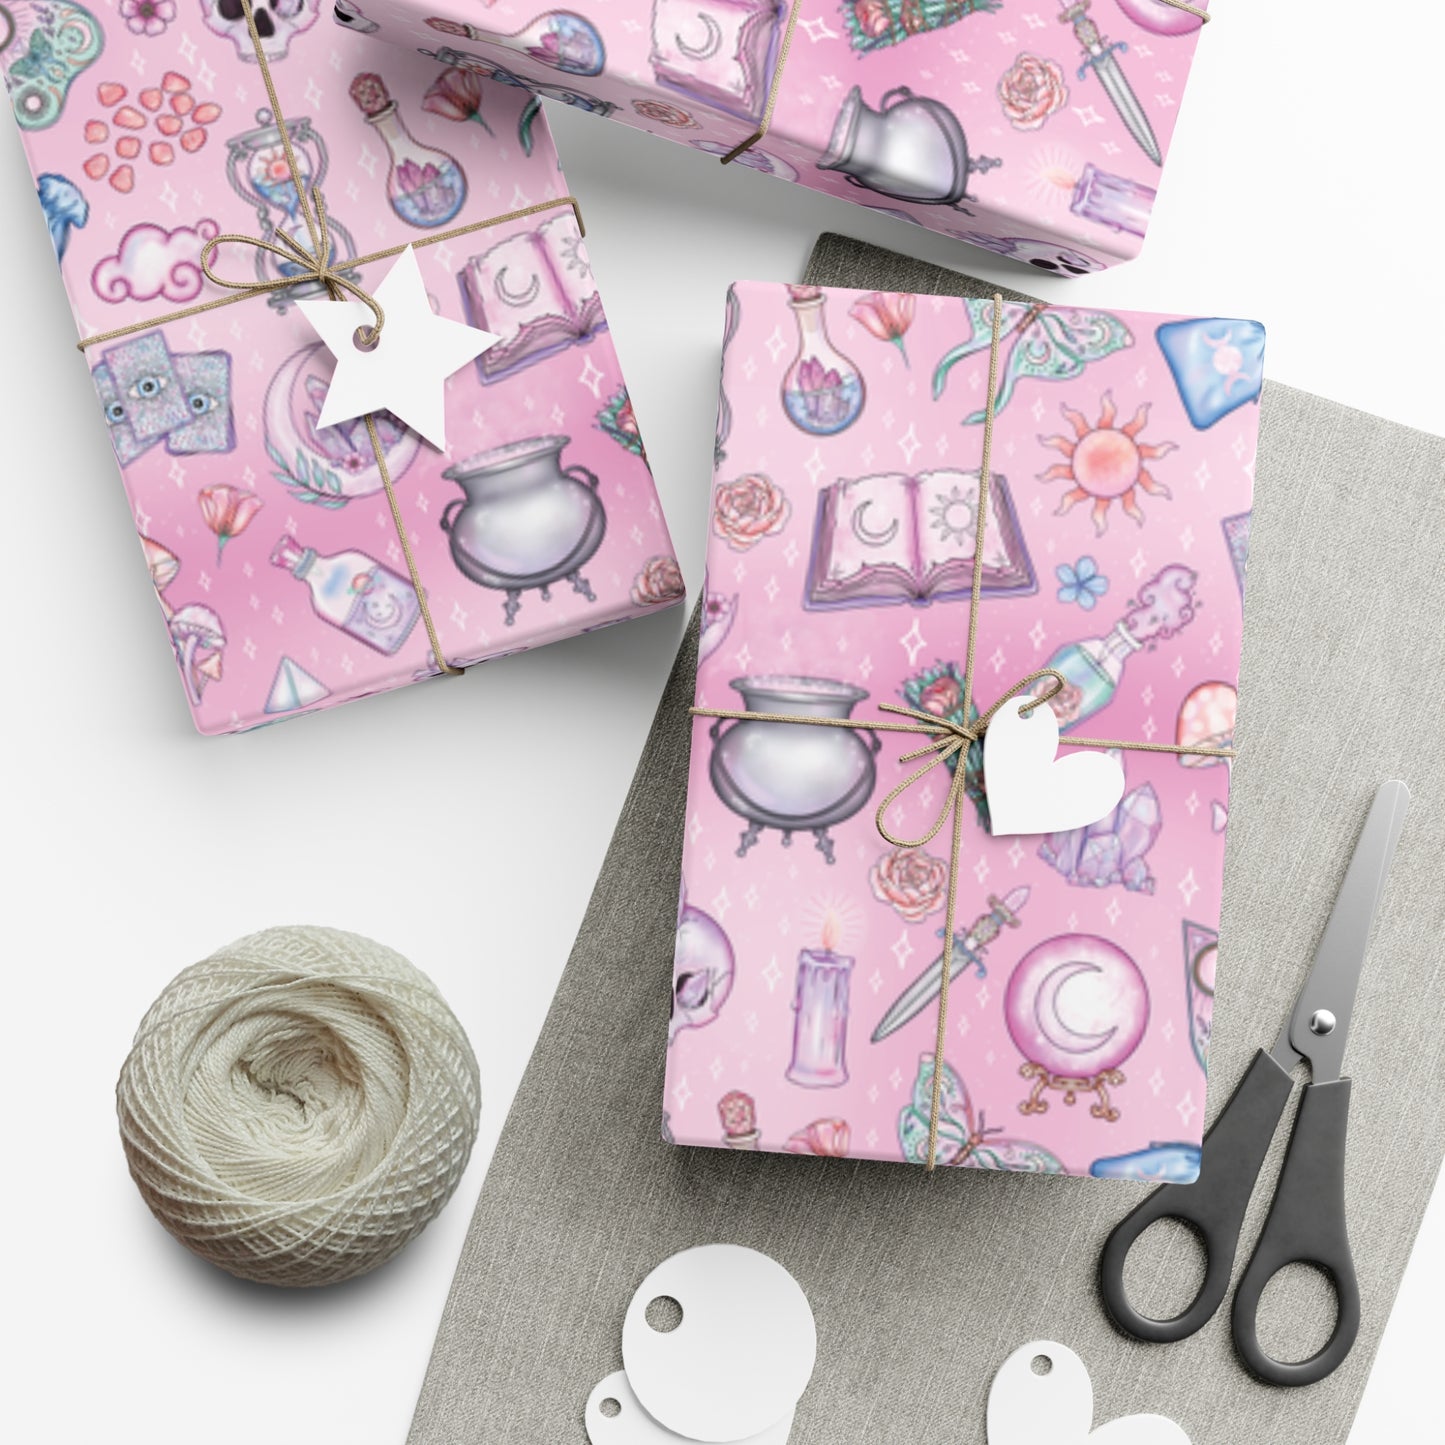 Witchy Pastel Goth Christmas, Kawaii Whimsigoth Pink Eco-Friendly Gift Wrap Paper